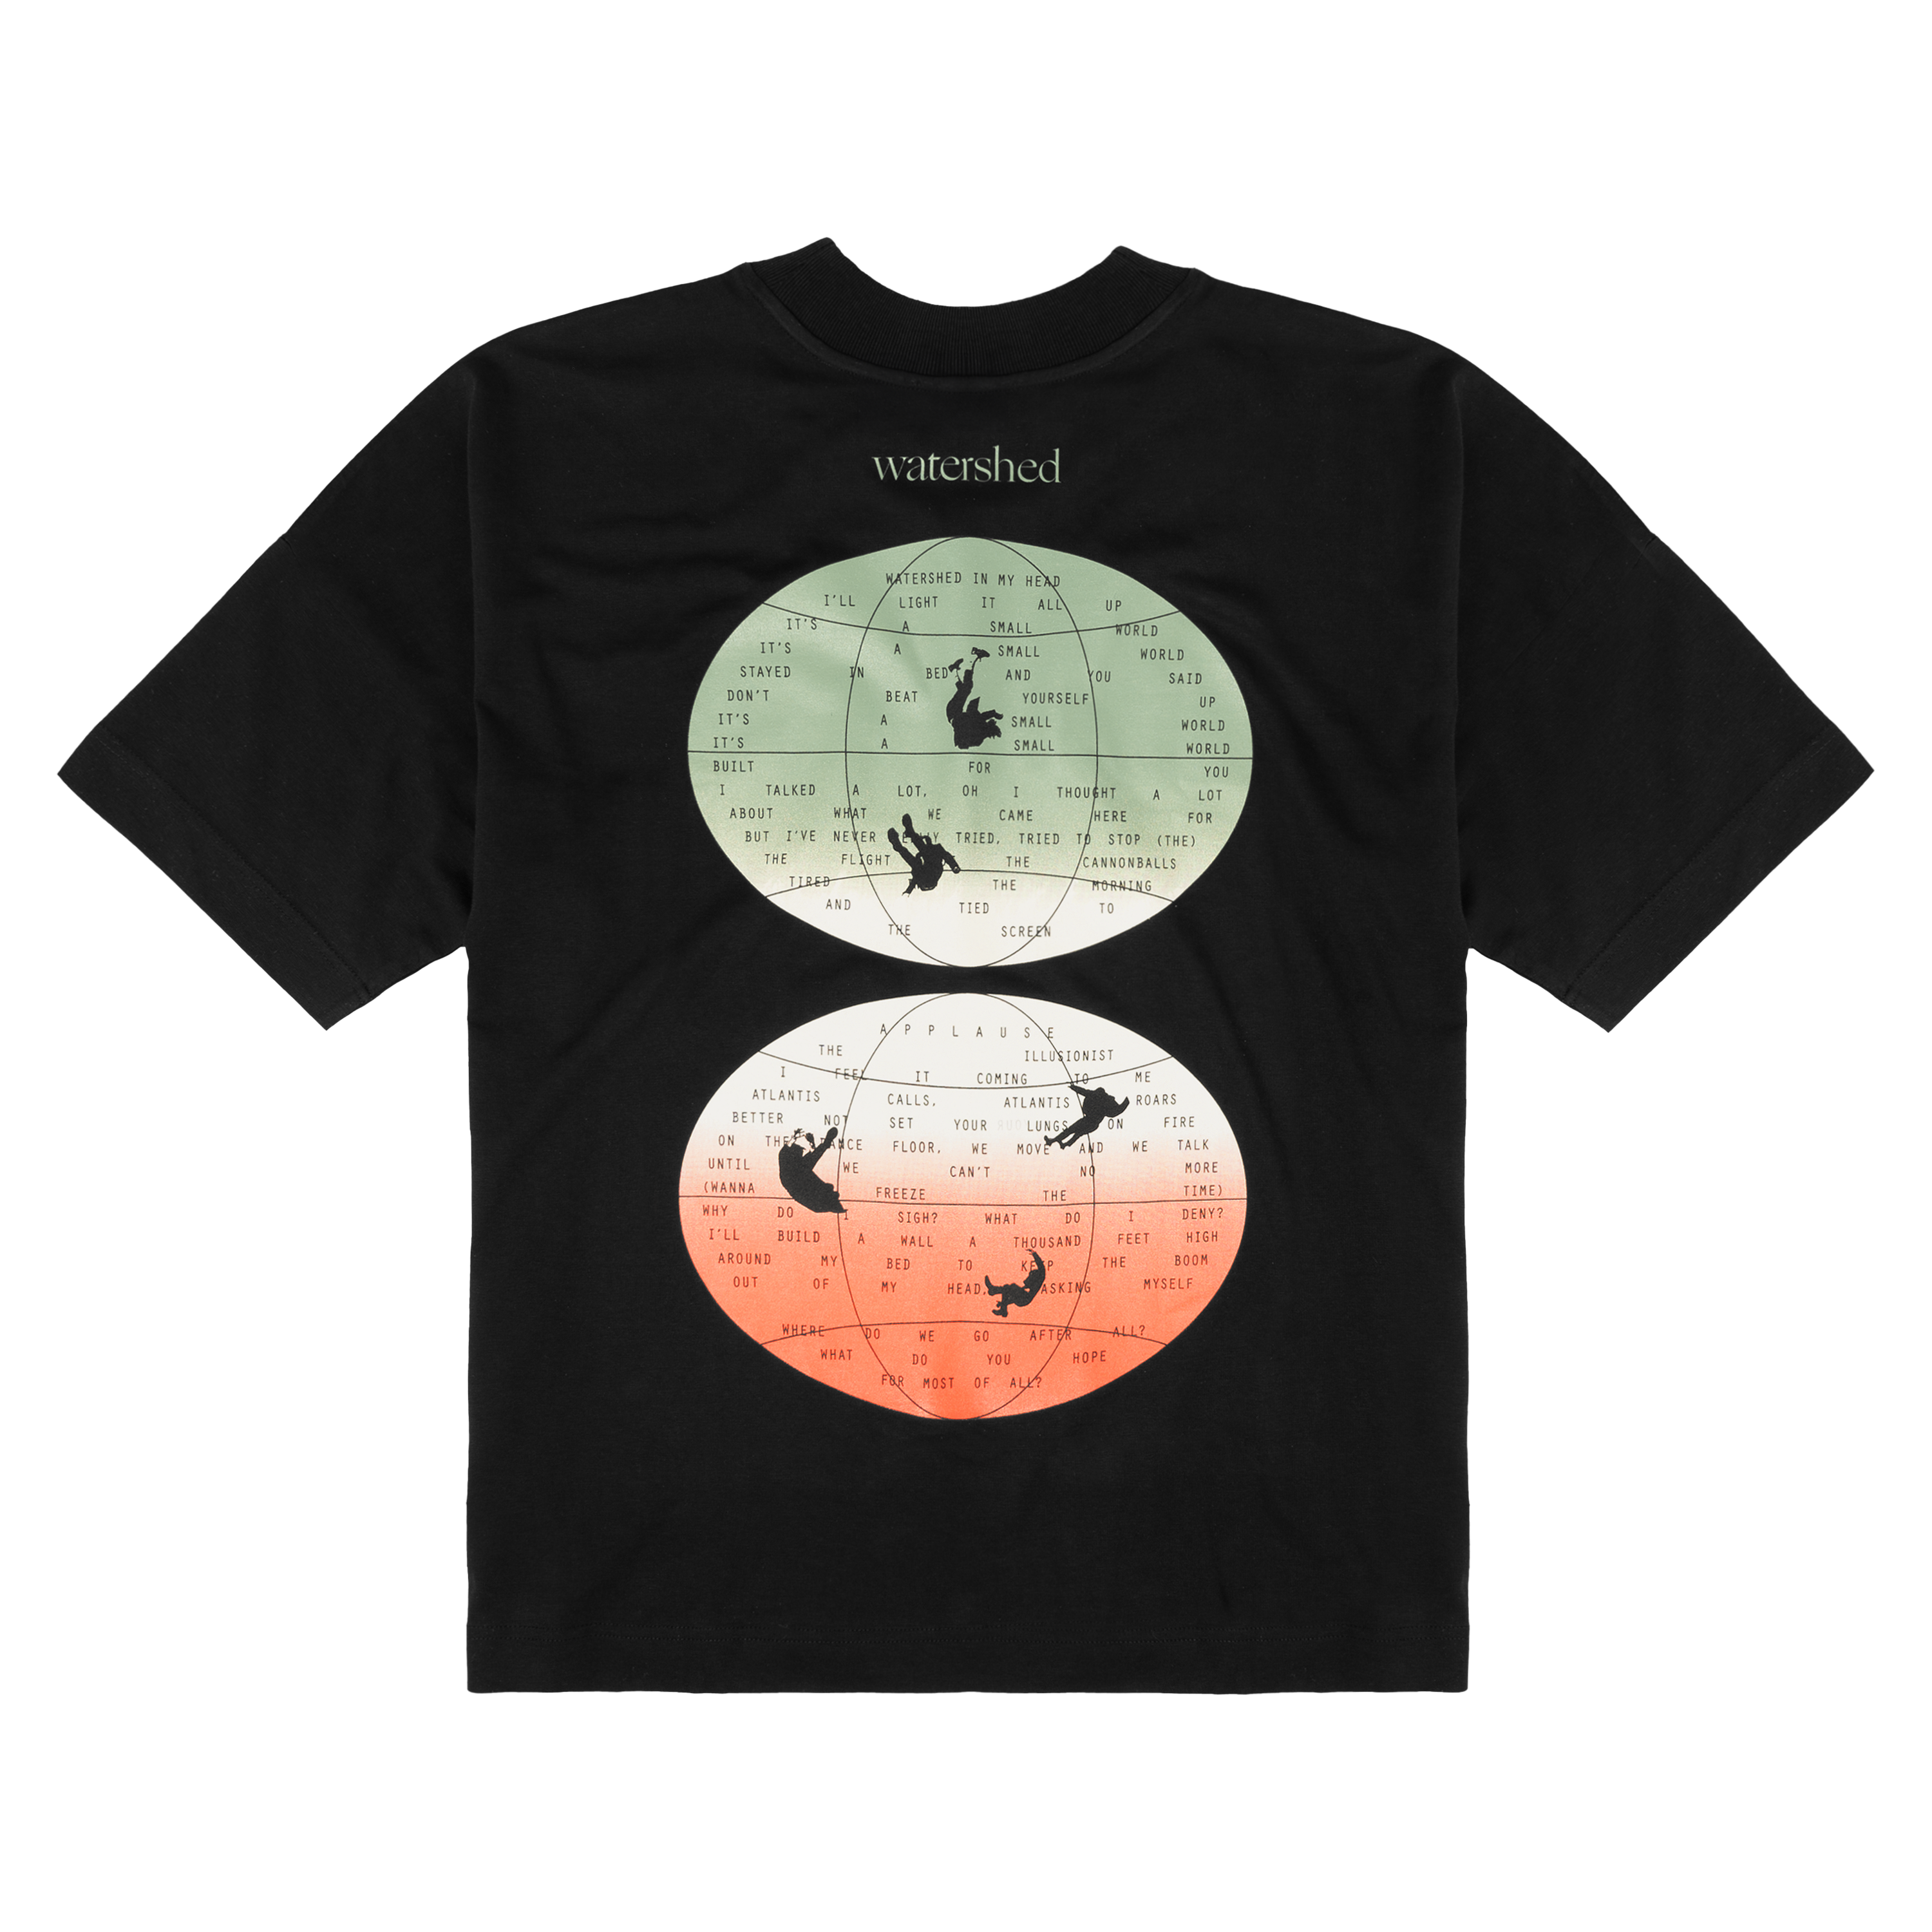 Giant Rooks - Black  Watershed T-Shirt